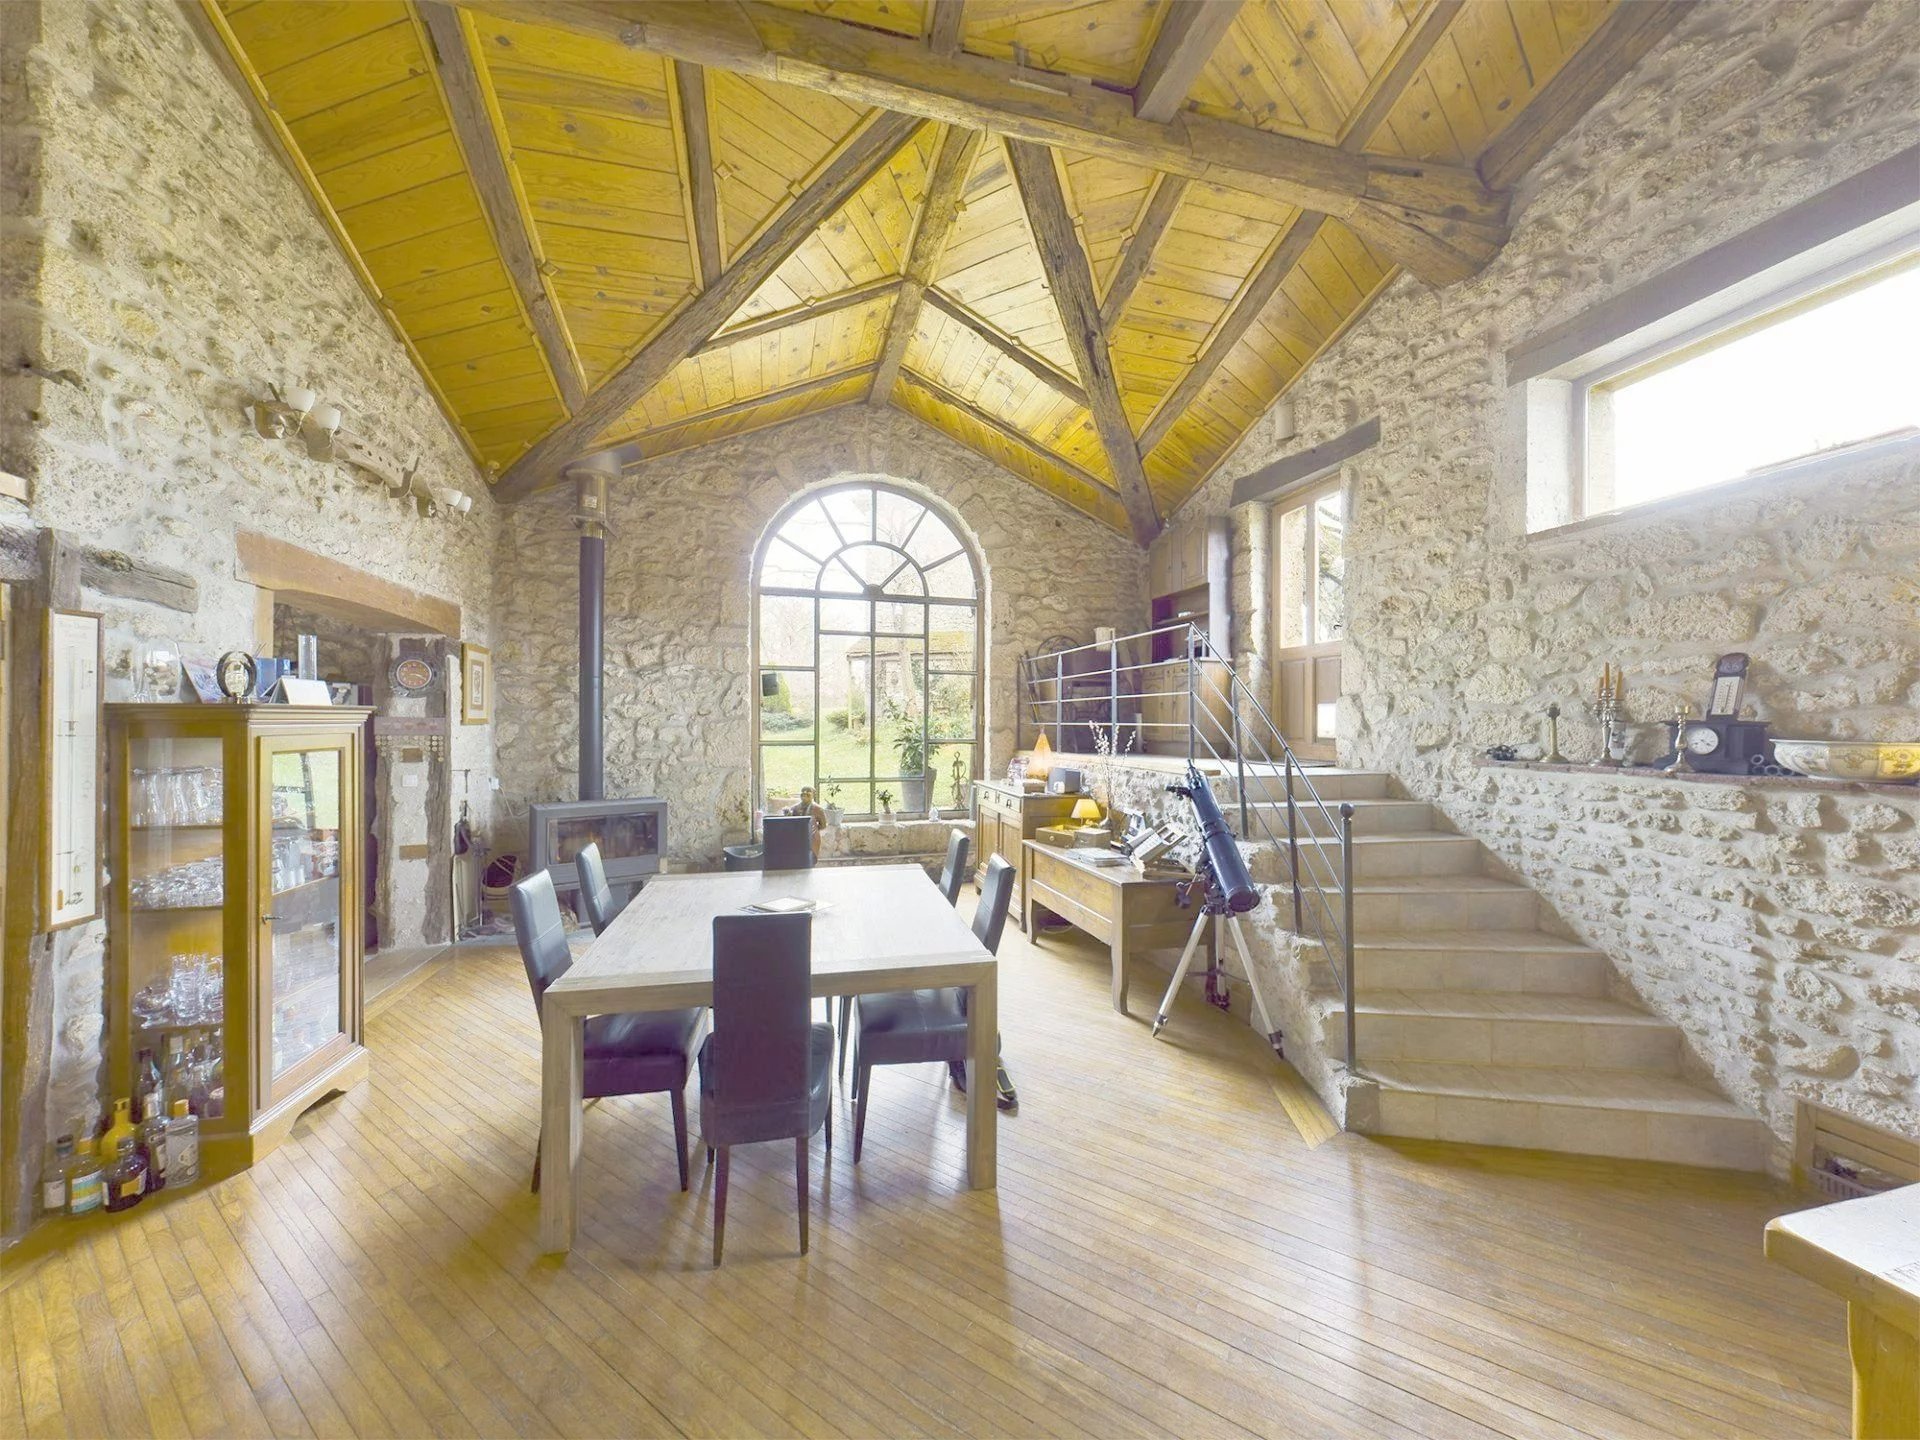 A real haven of peace for this superb property